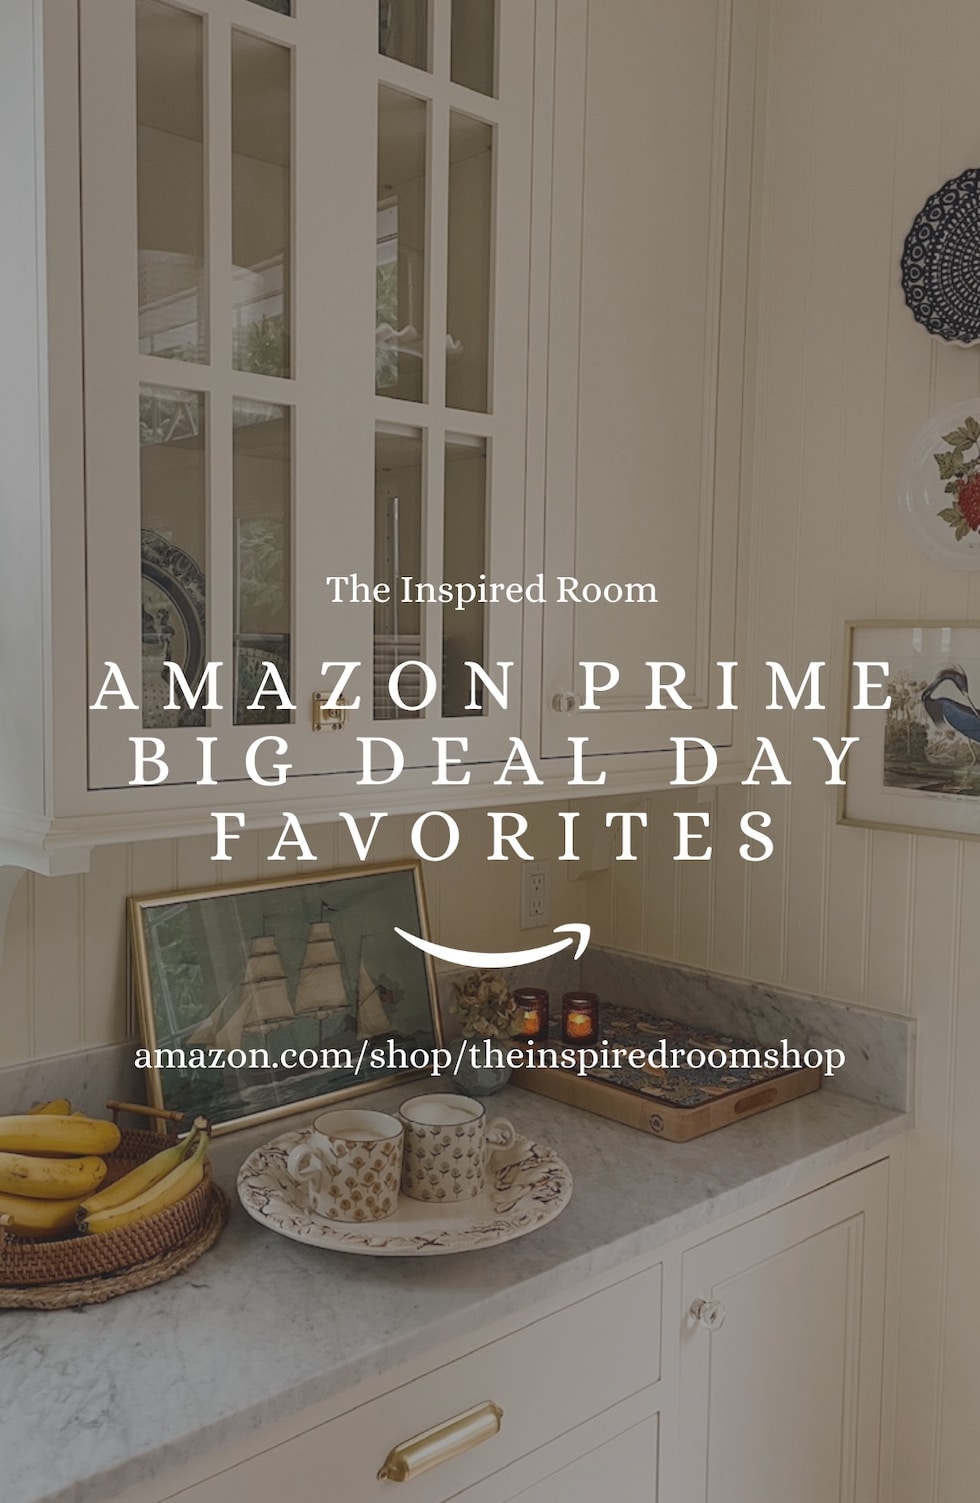 Prime Day 2023, Prime Big Deal Days - Select